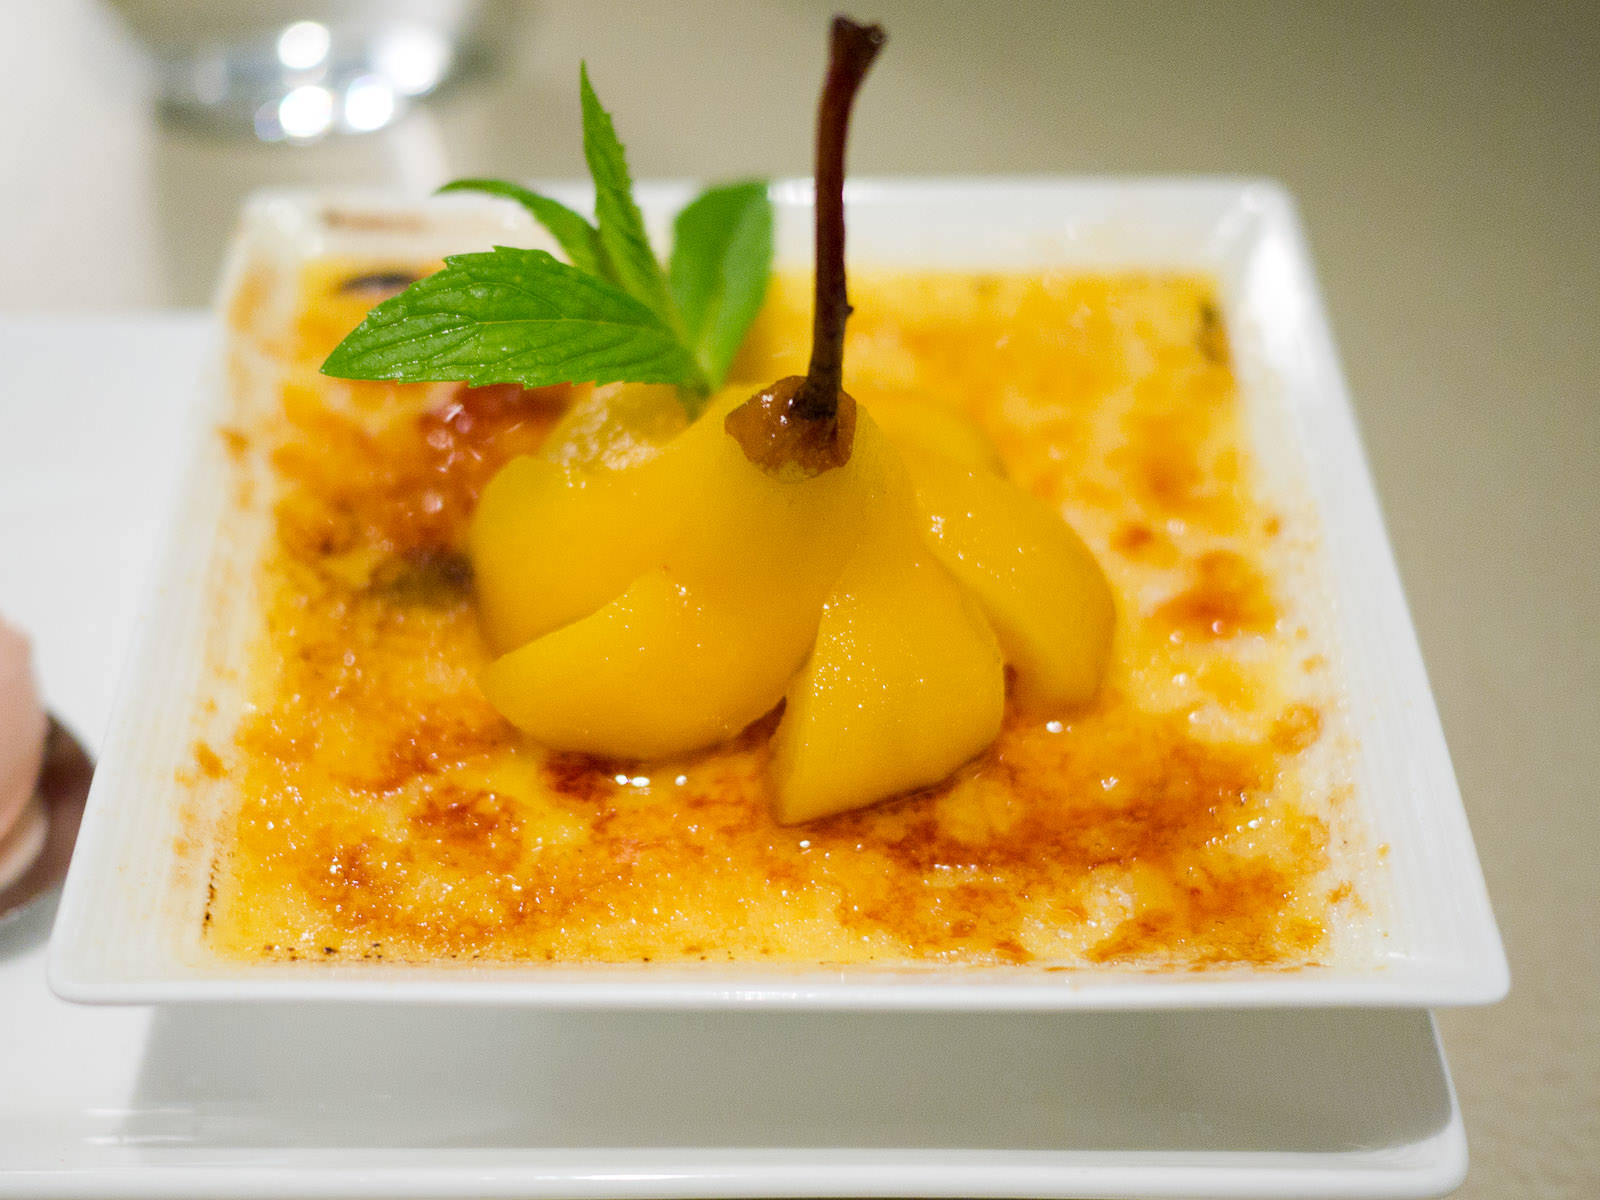 Creme brulee, poached pear in saffron and pinot grigio